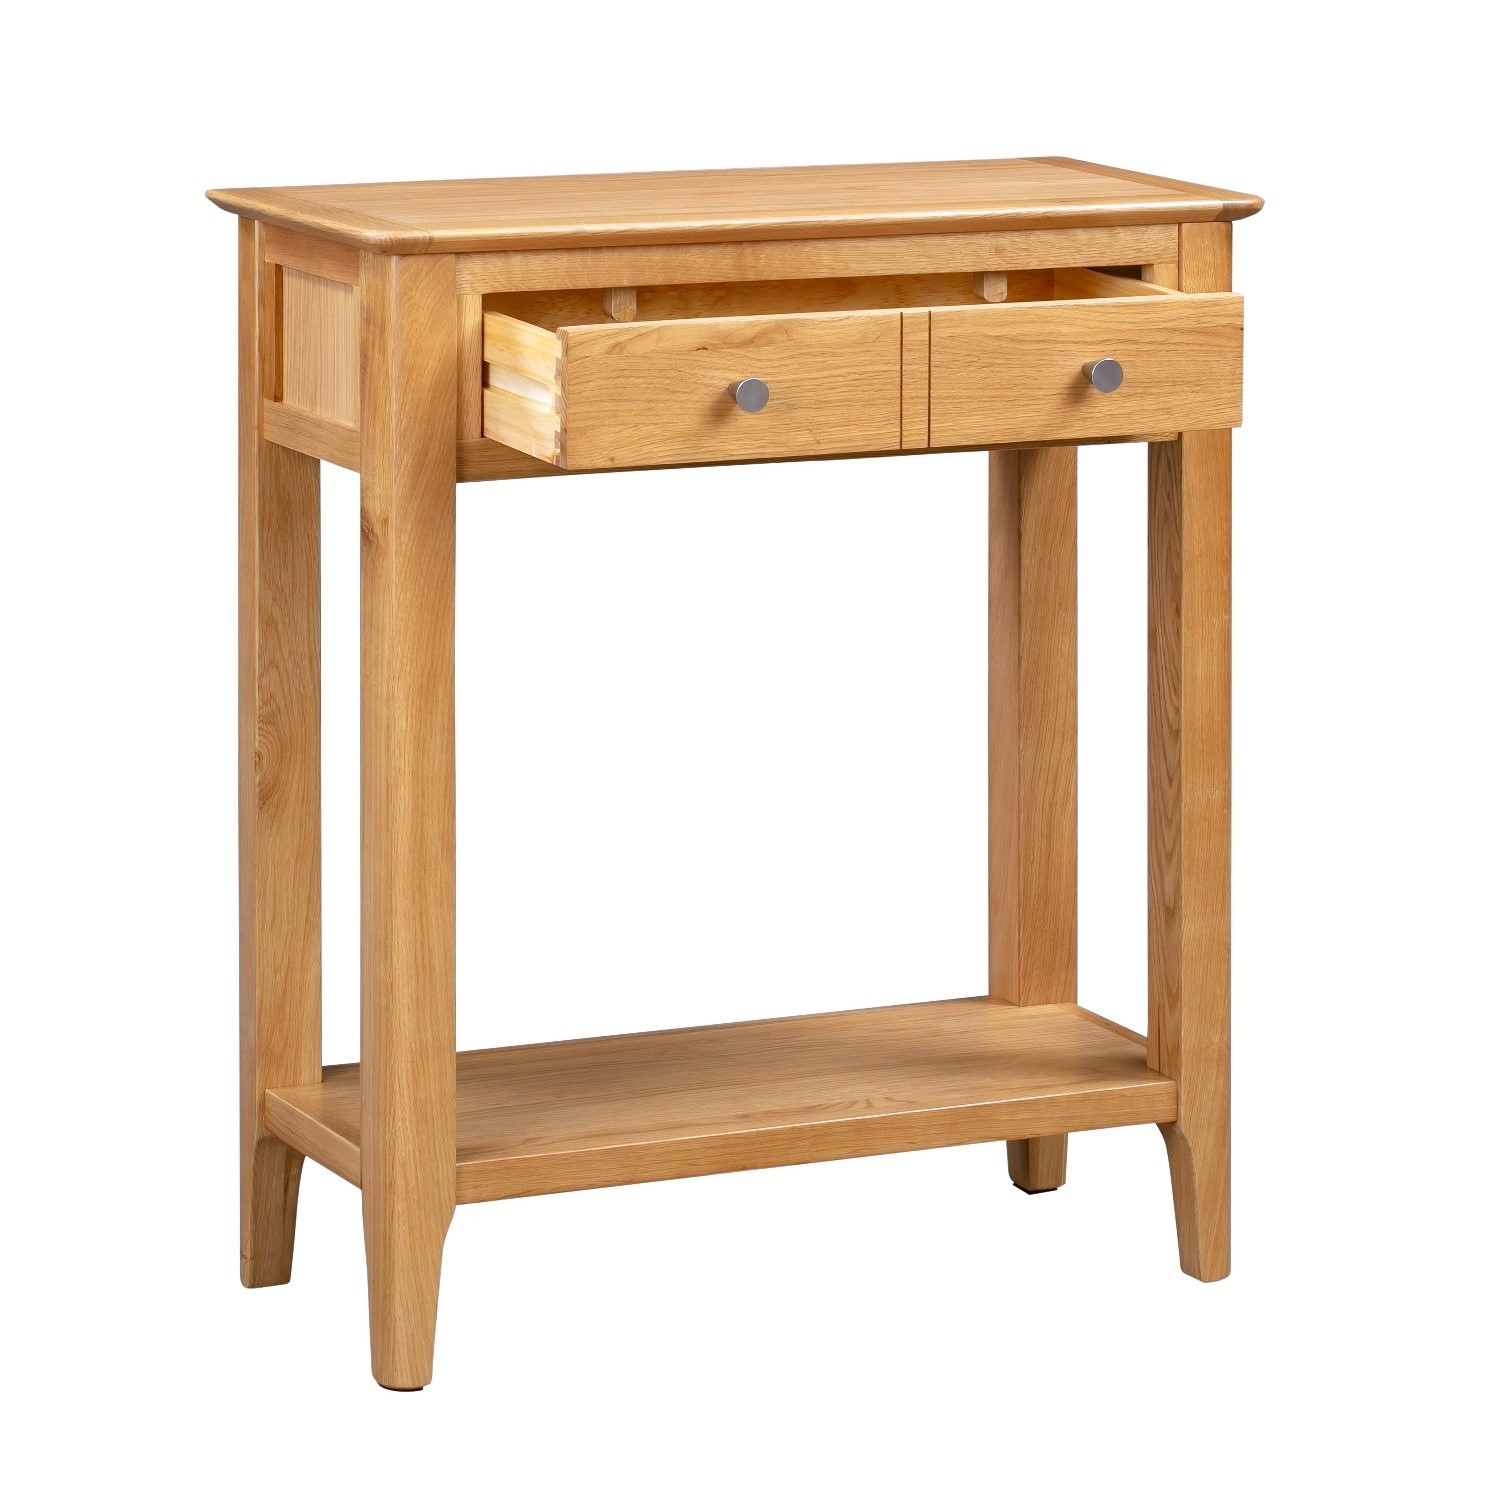 Narrow Solid Oak Console Table With, Small Narrow Console Table With Drawers